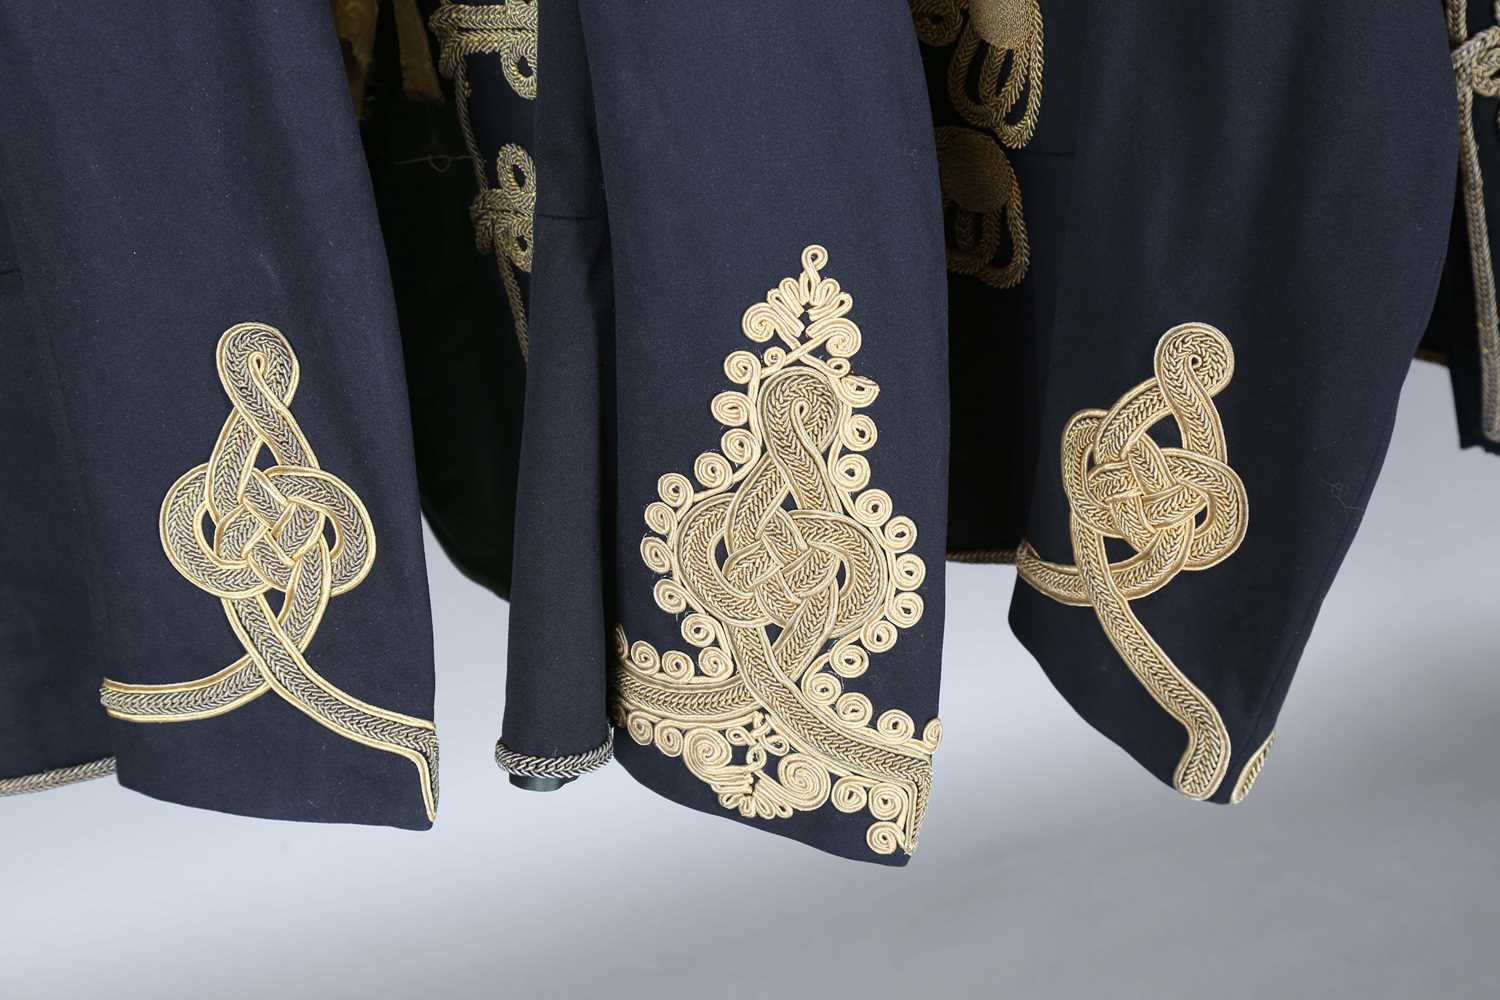 A group of early 20th century officer's dress tunics with bullion-embroidered decoration and rank - Image 15 of 23